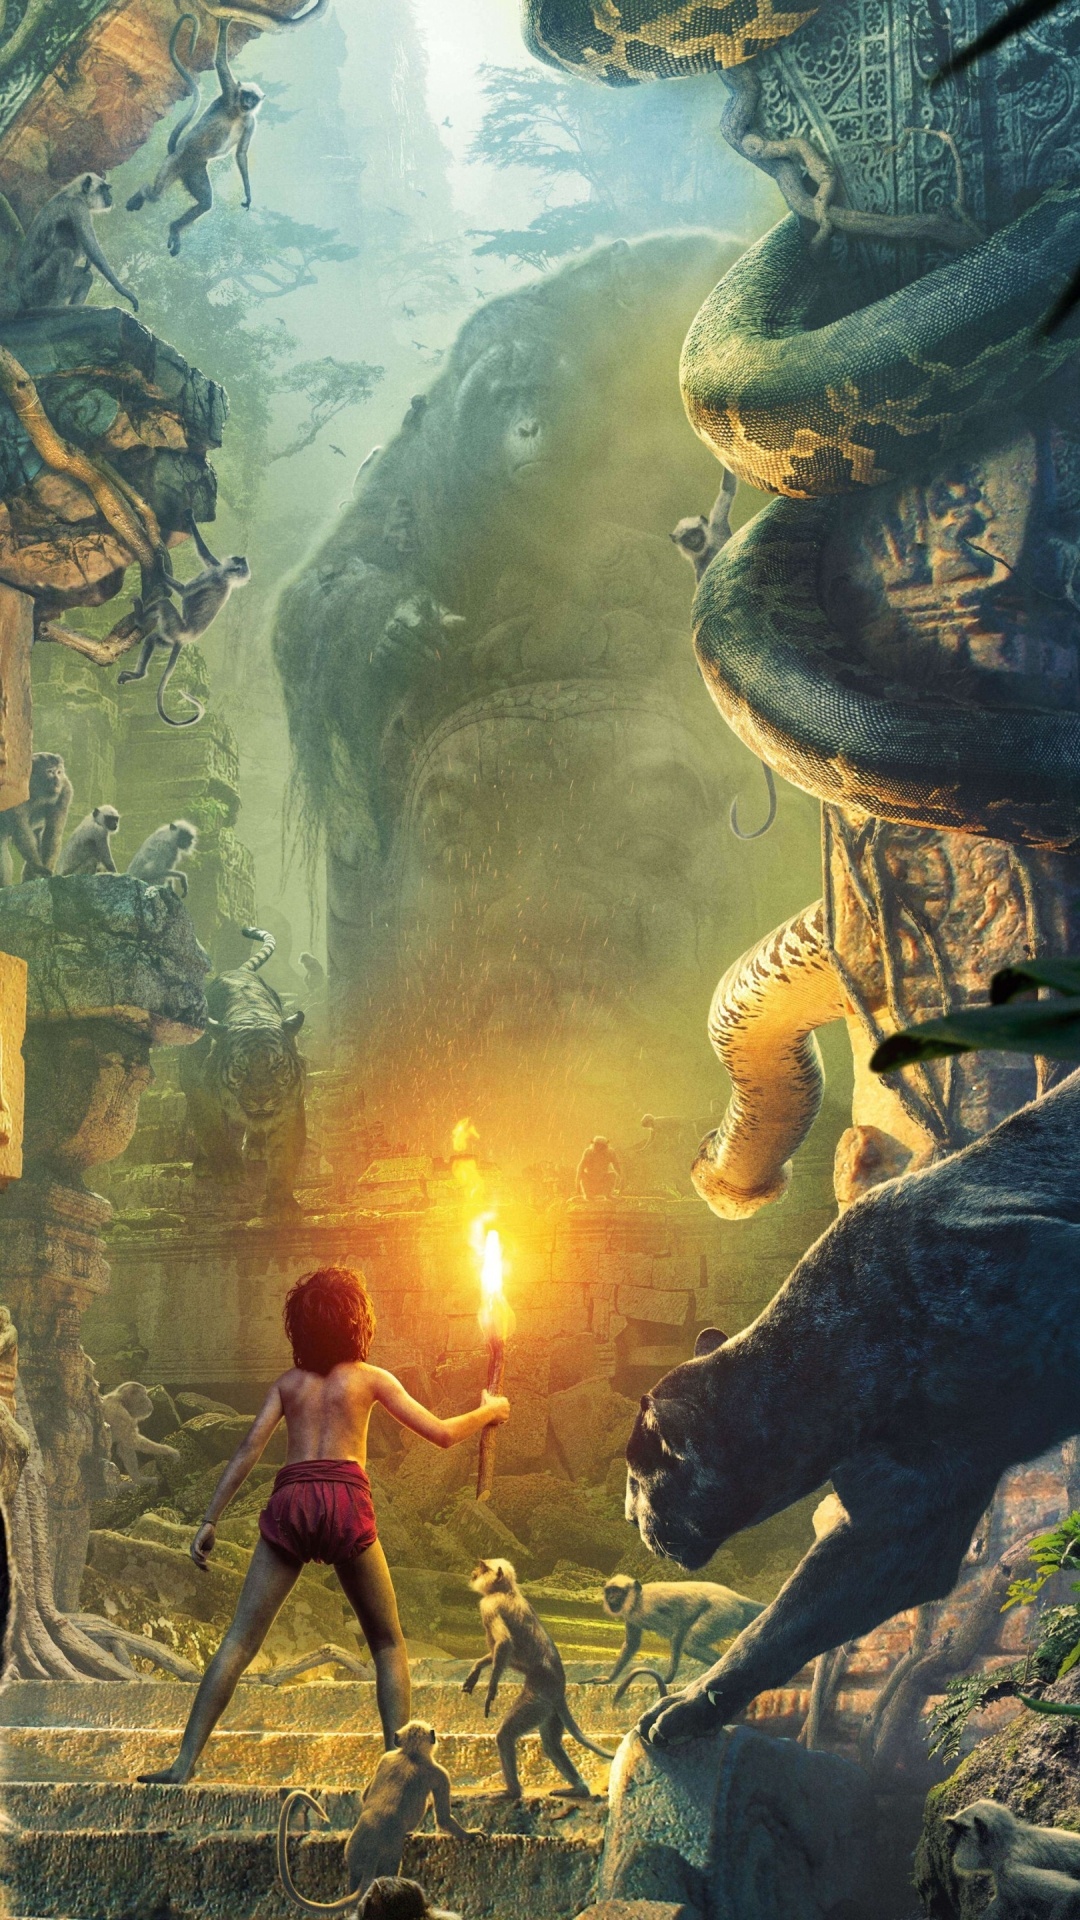 The Jungle Book (Movie), 2016 movie experience, Journey in the wild, Heartwarming tale, 1080x1920 Full HD Handy